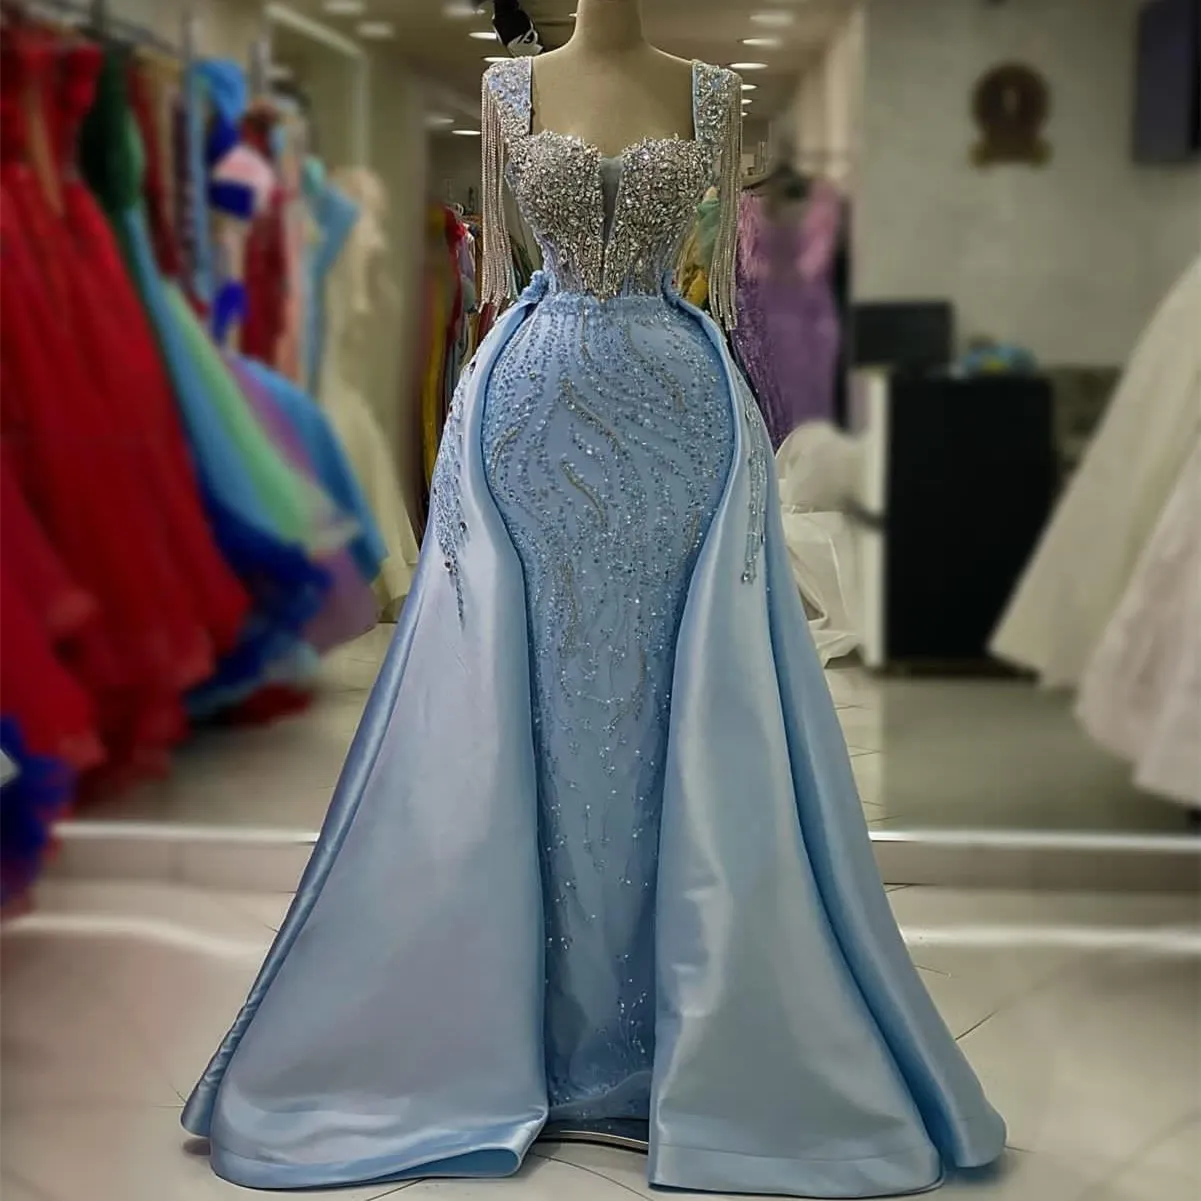 2023 Aso Ebi Arabic Mermaid Sky Blue Prom Dress Crystals Sequined Lace Evening Formal Party Second Reception Birthday Engagement Gowns Dresses Robe De Soiree ZJ237